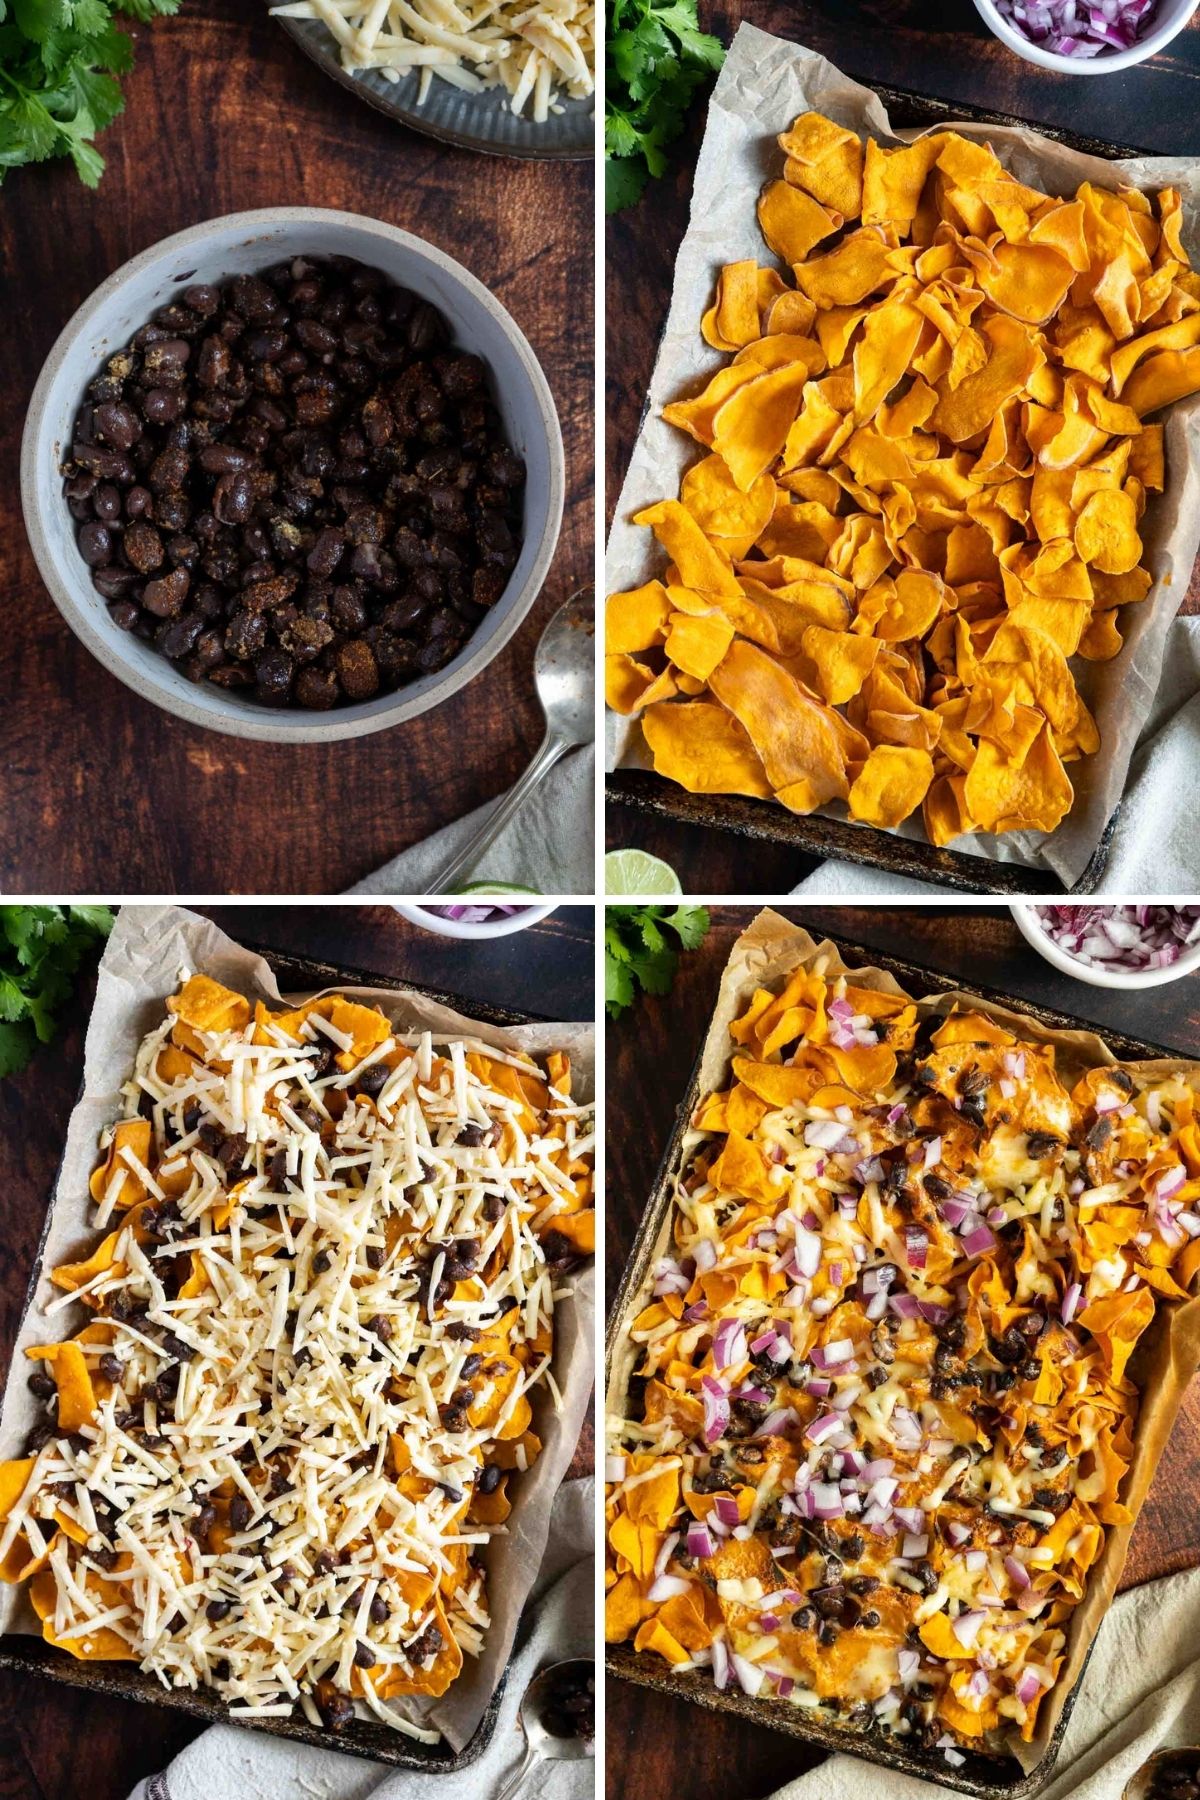 Layering sweet potatoes and layering on the toppings.